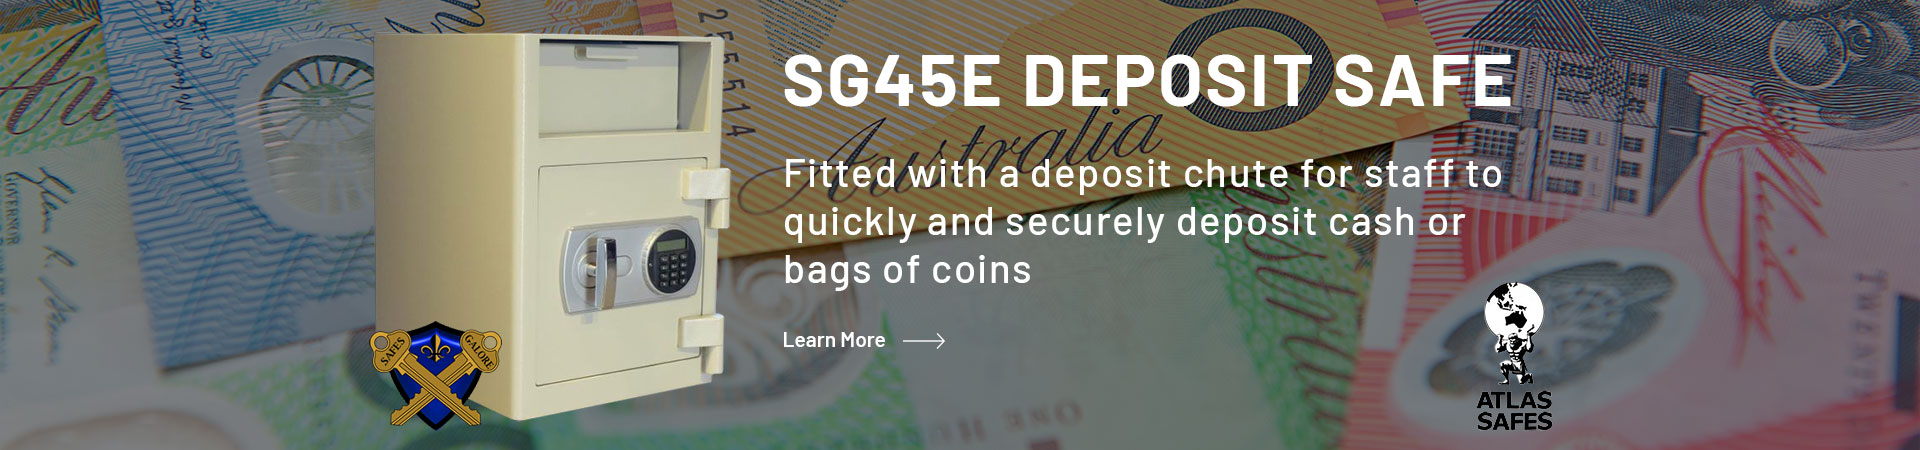 Learn more about the SG45E Deposit Safe. It's fitted with a deposit chute for staff to quickly and securely deposit cash or bags of coins.